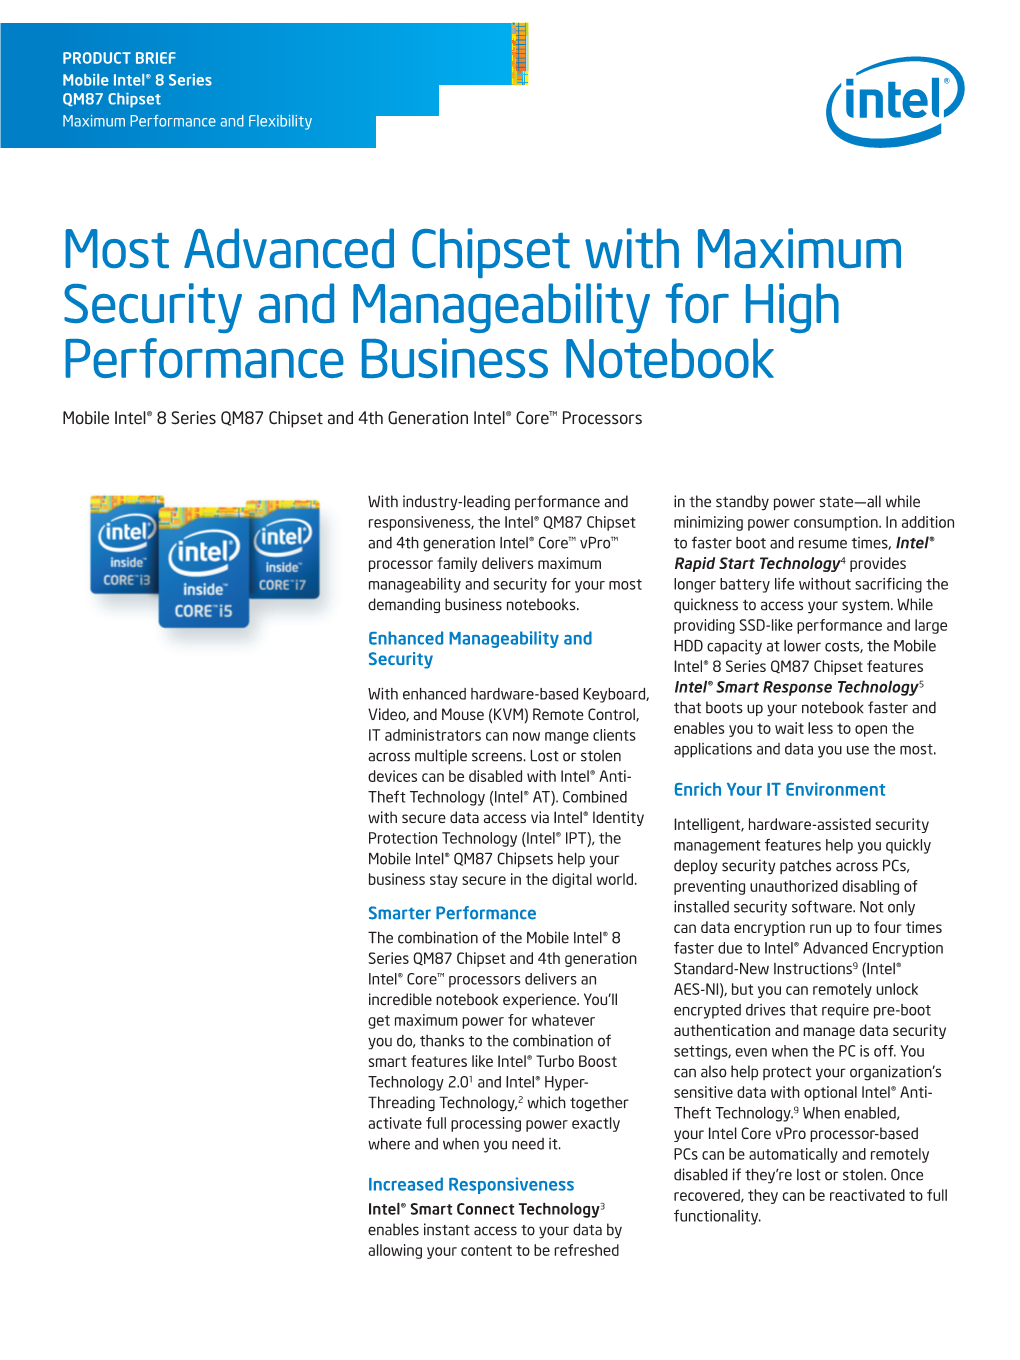 Most Advanced Chipset with Maximum Security and Manageability for High Performance Business Notebook